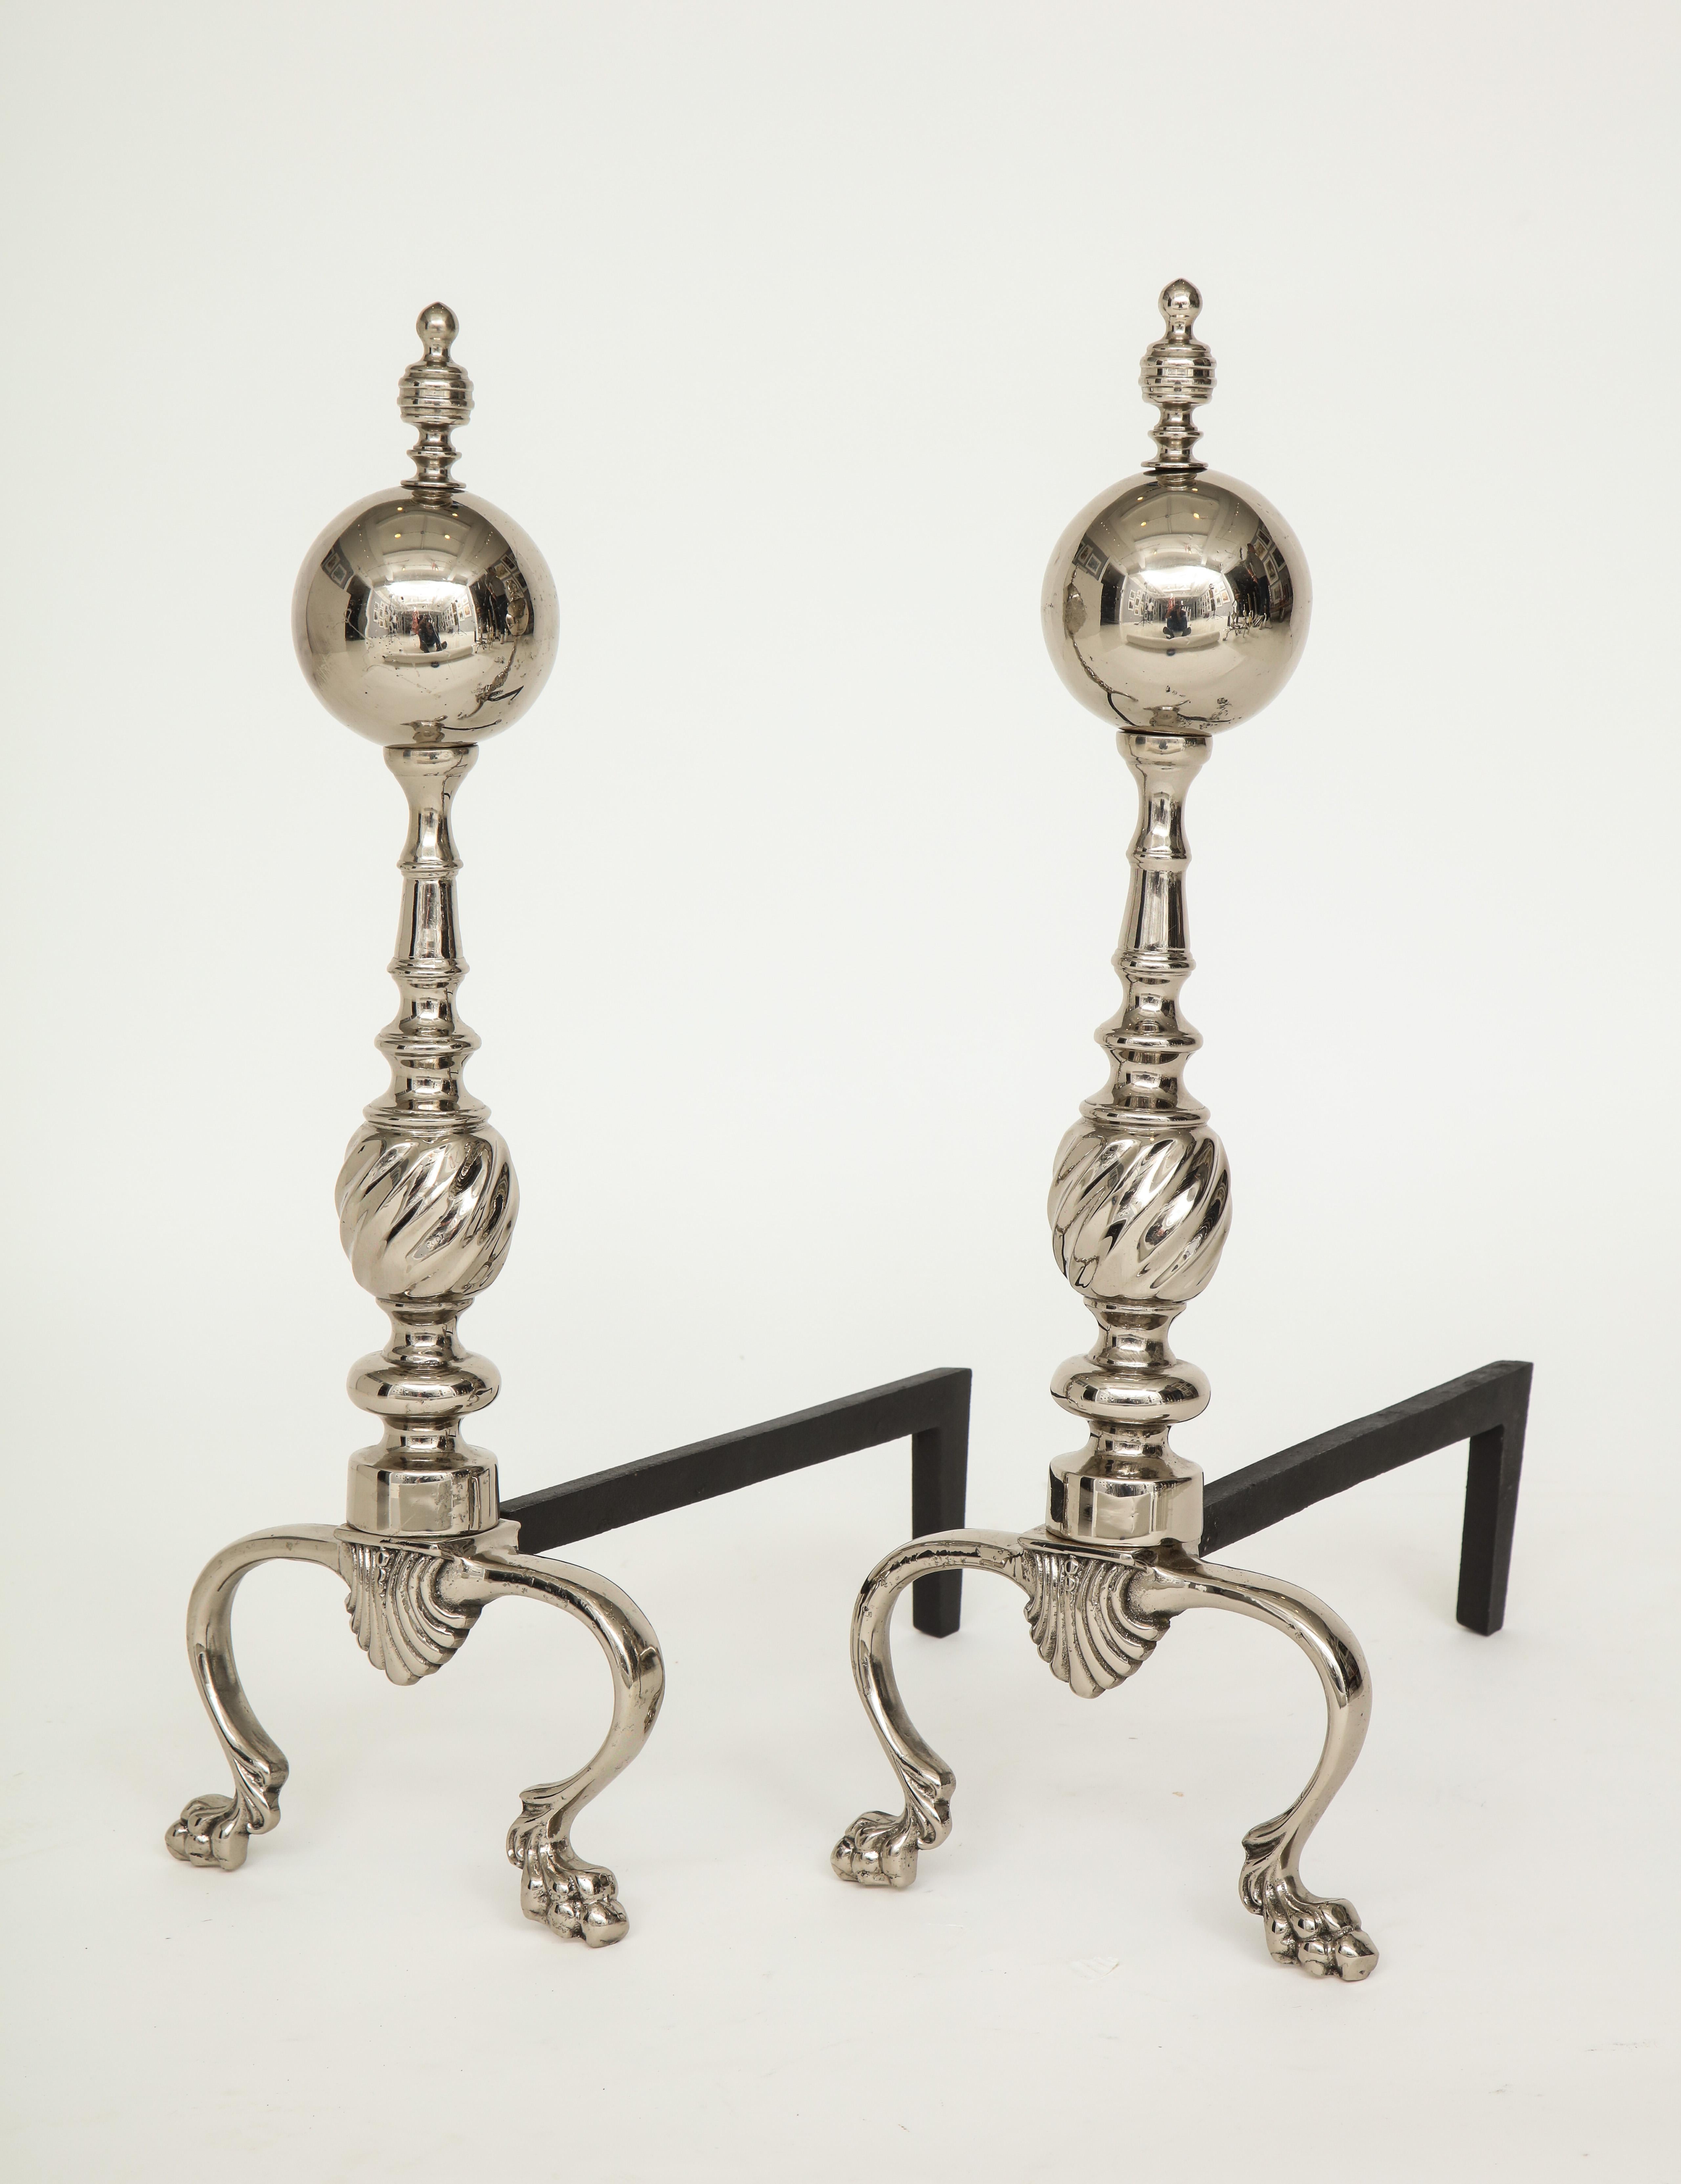 Pair of polished nickel andirons with cannonball finial, fluted body and stylized shell detail ending with claw/ball feet. New iron backs.